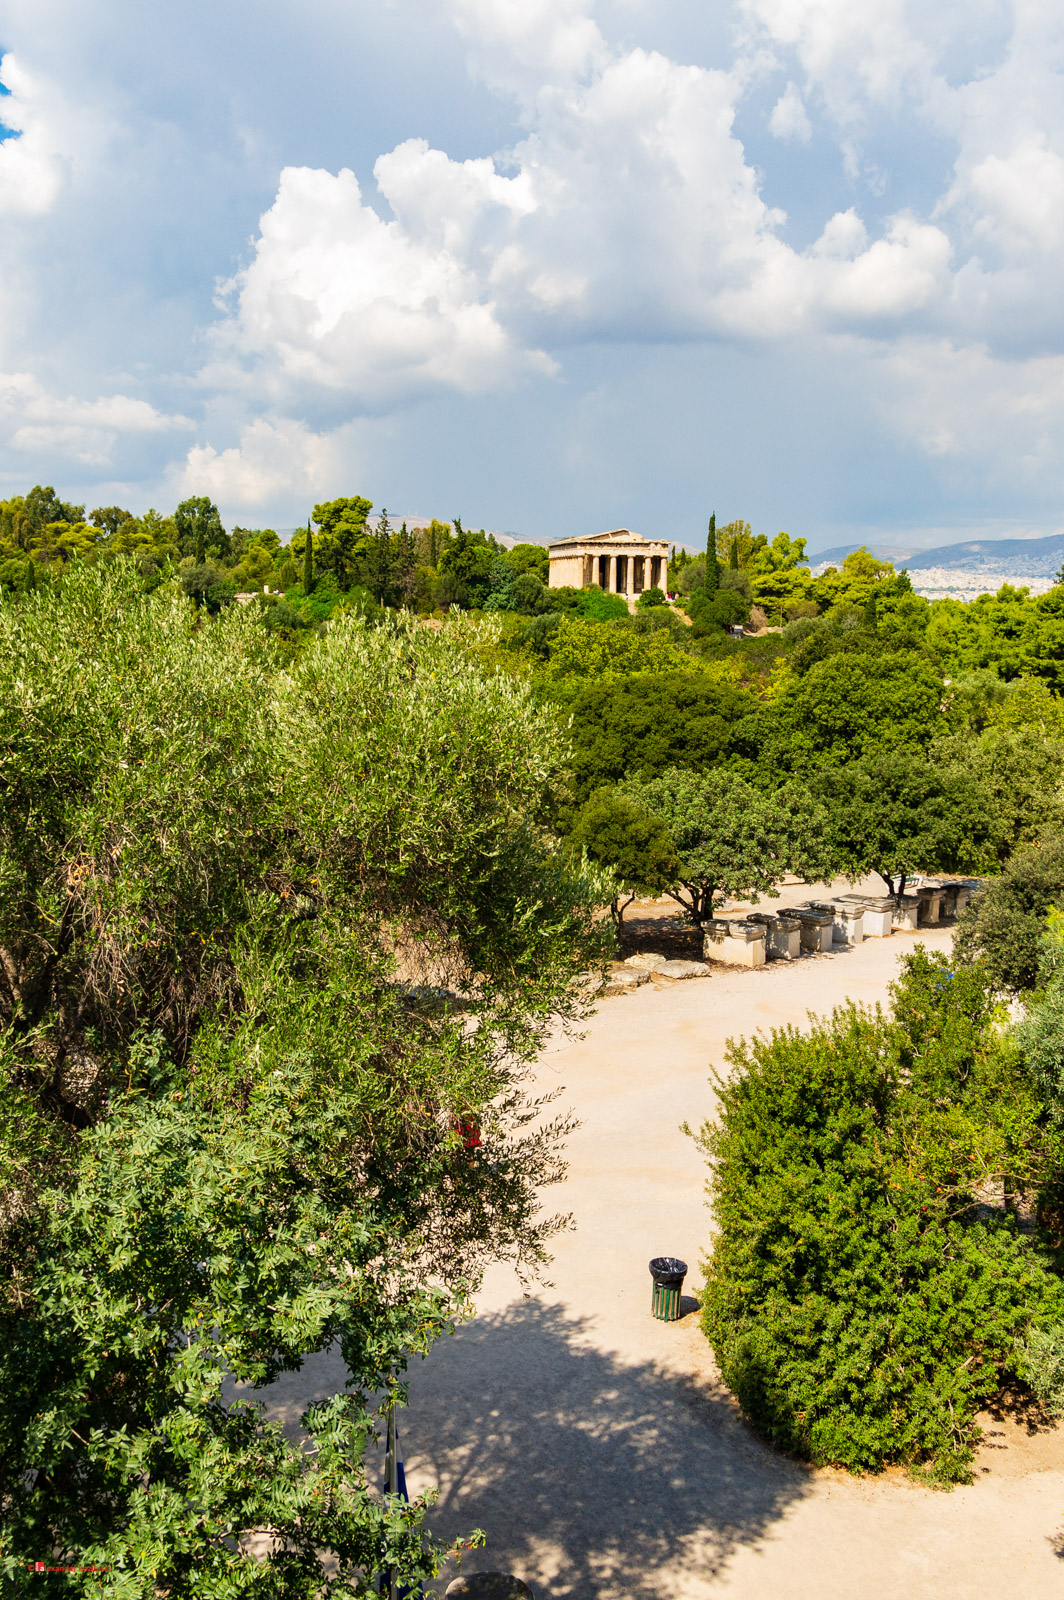 View of Temple of Hephaestus from the Museum of the Ancient Agor